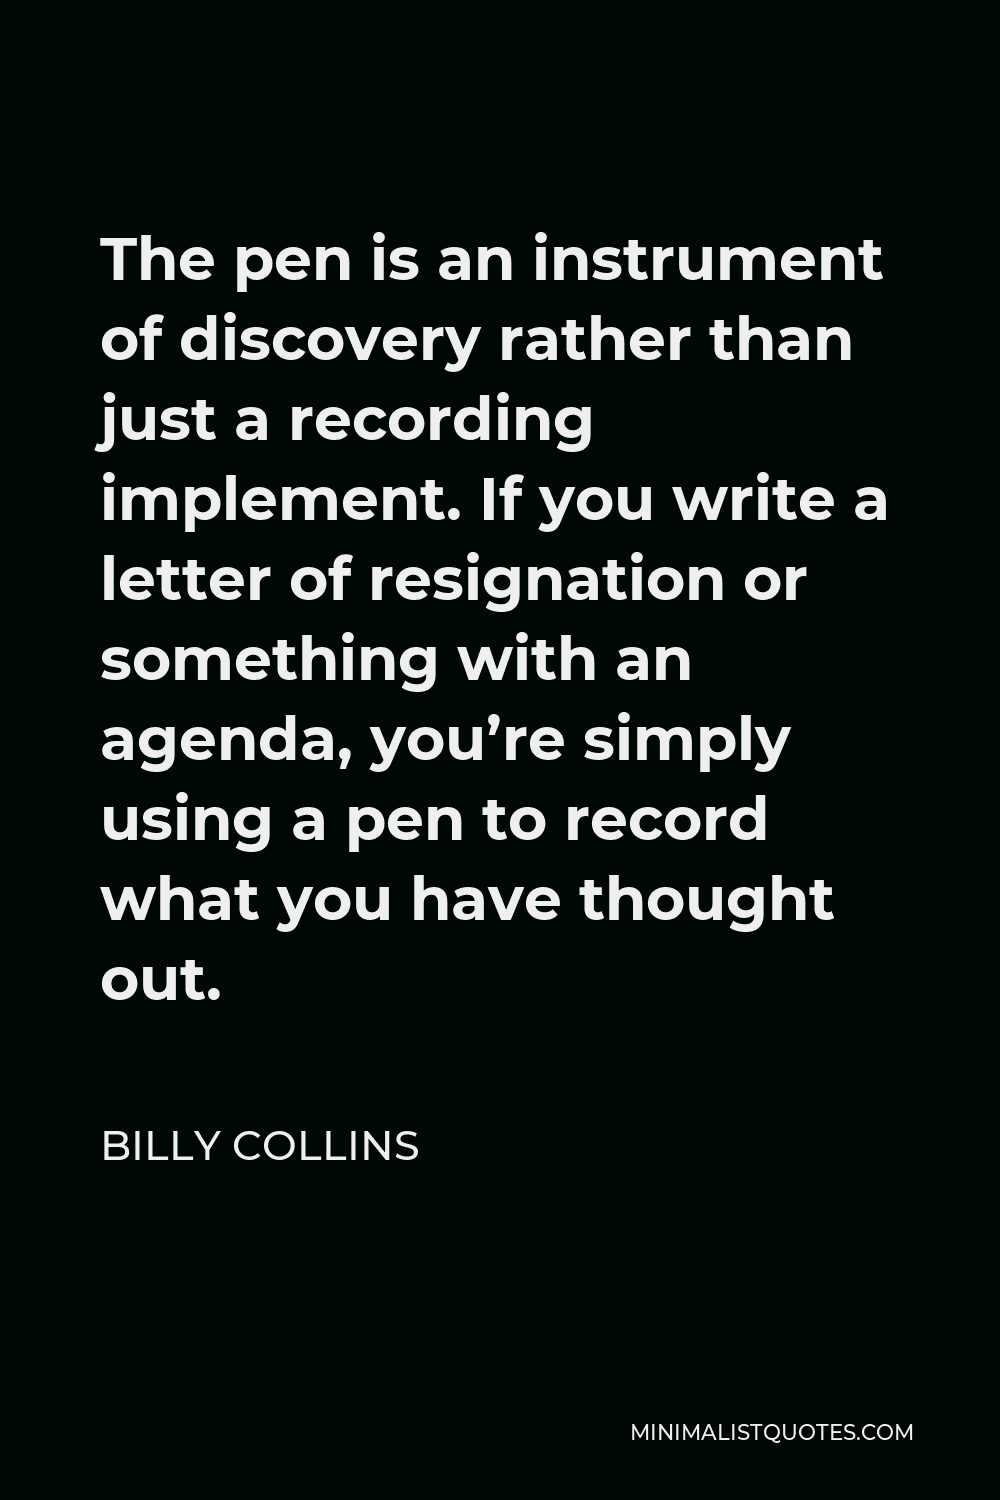 Billy Collins Quote - The pen is an instrument of discovery rather than just a recording implement. If you write a letter of resignation or something with an agenda, you’re simply using a pen to record what you have thought out.